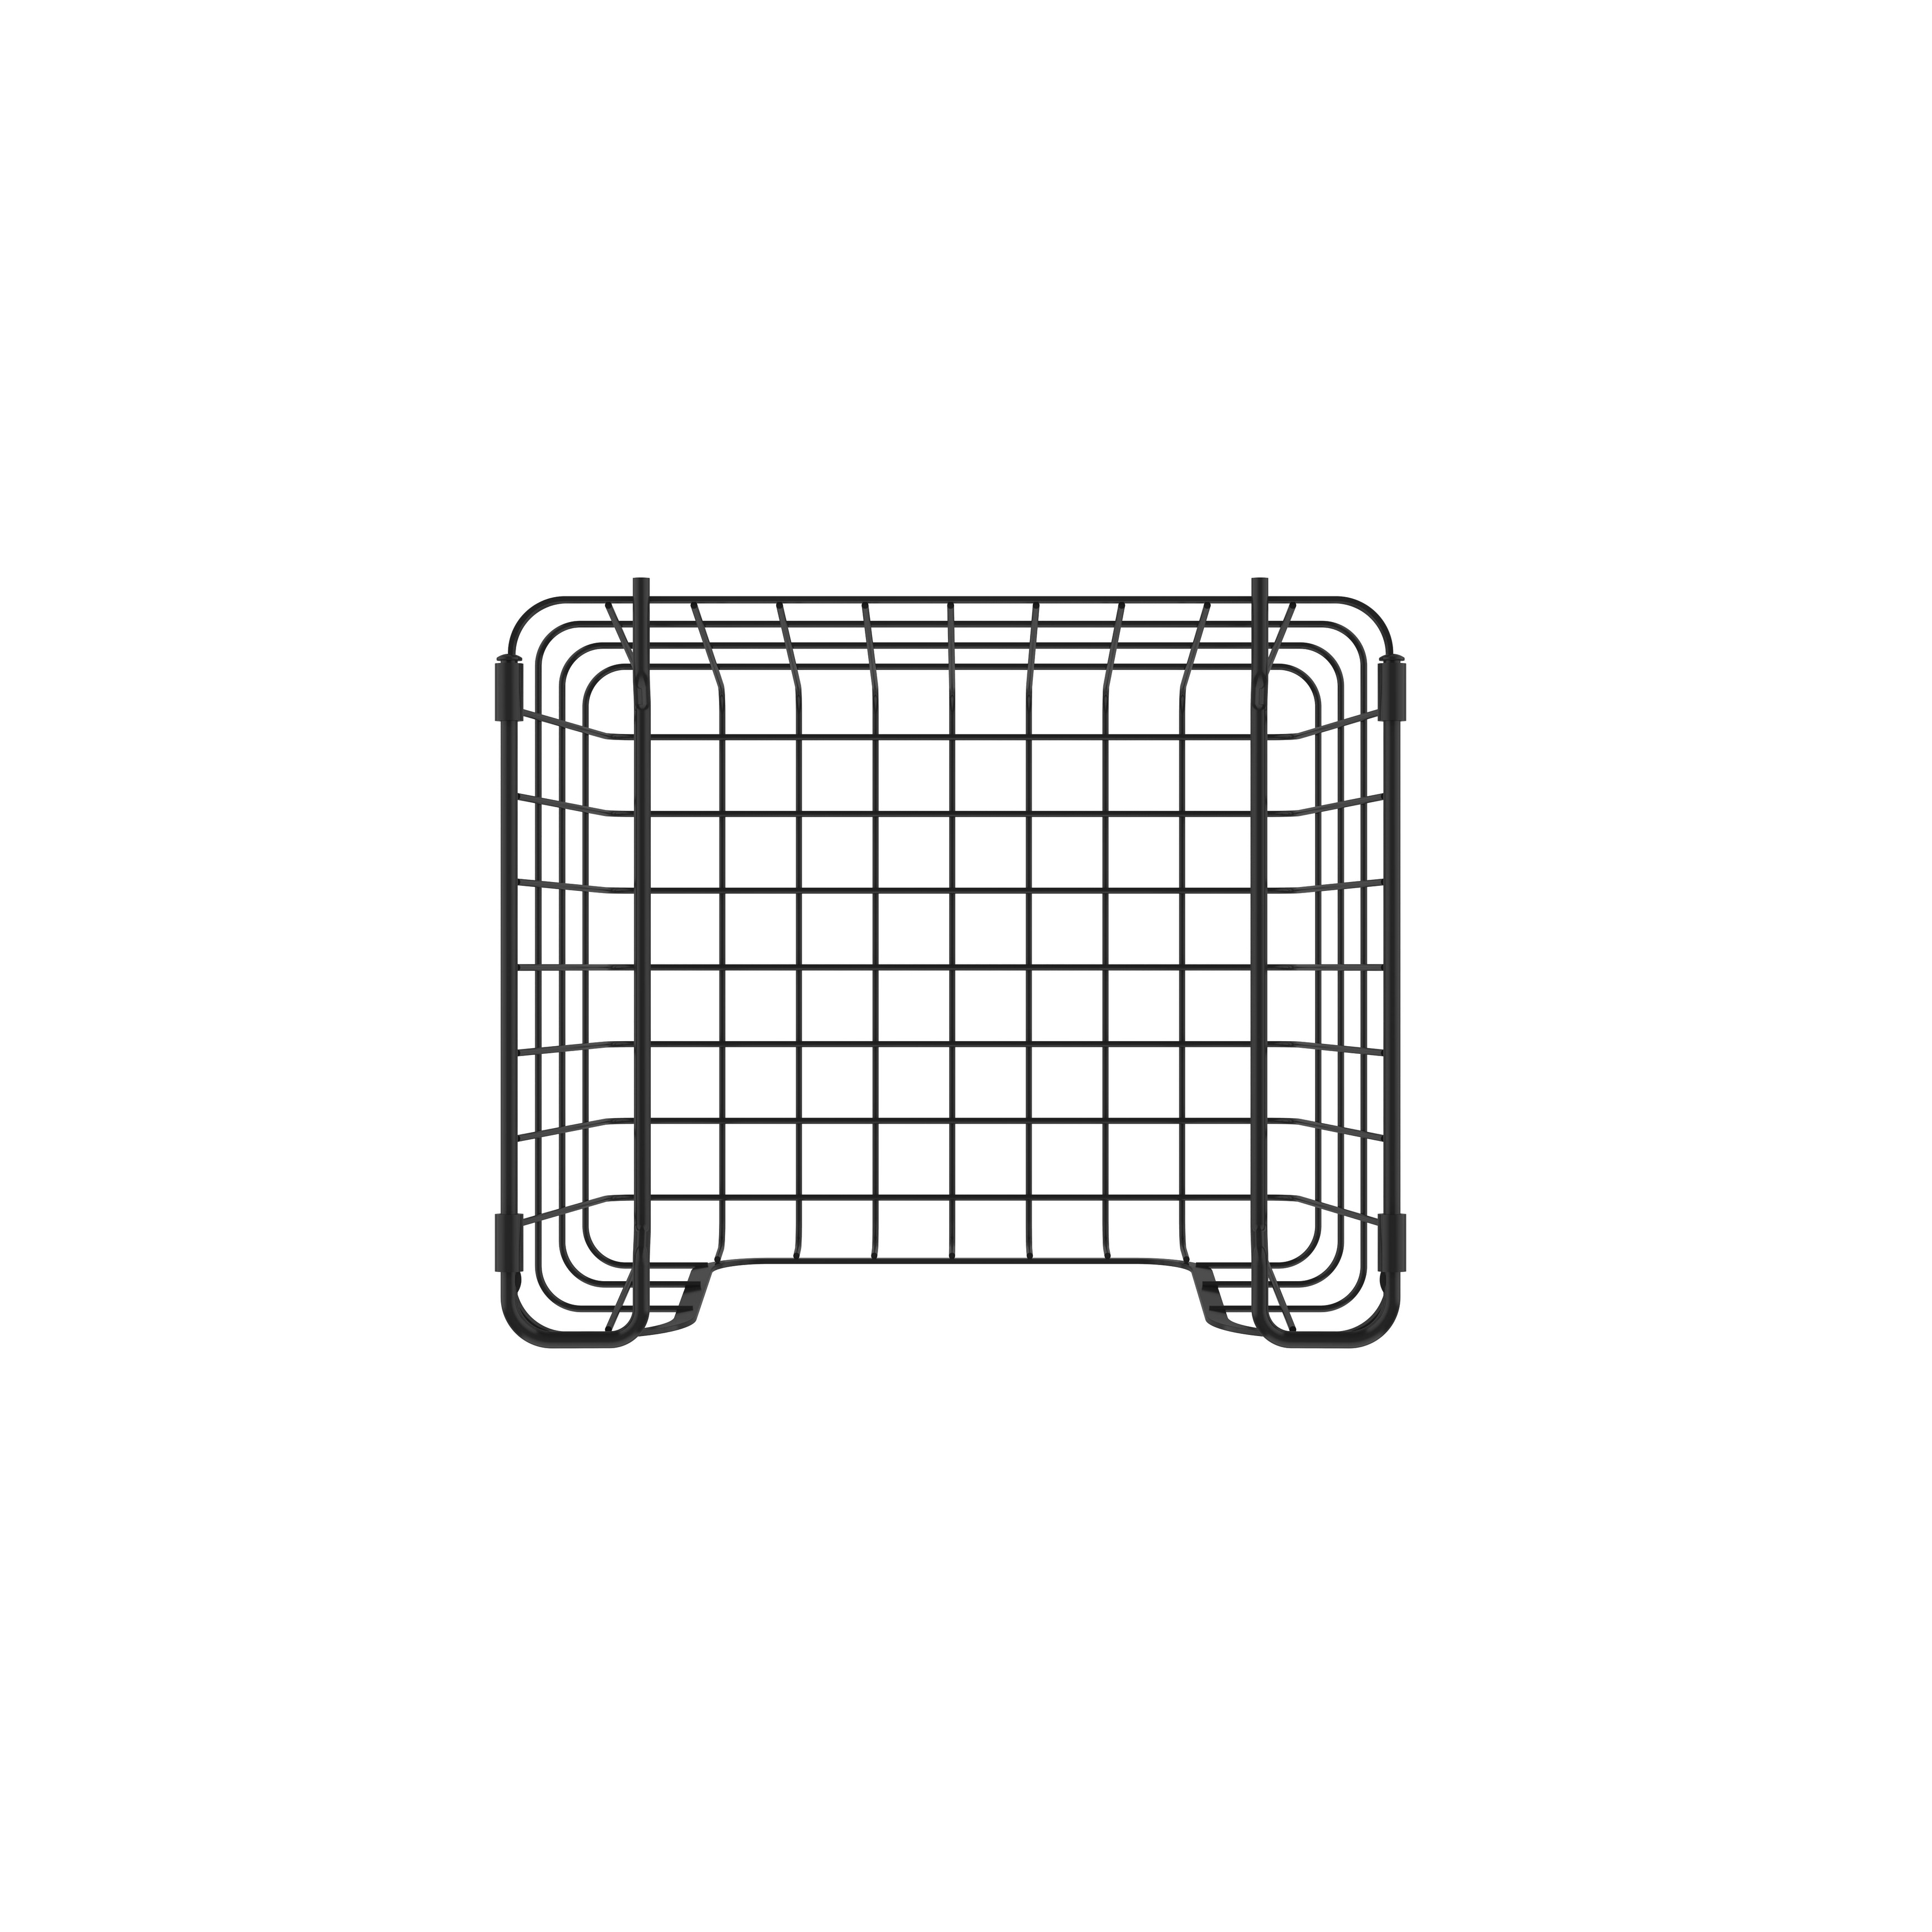 https://ak1.ostkcdn.com/images/products/is/images/direct/498791236a509d598e8ad157bd5d632cfdfa50c9/Oceanstar-Stackable-Metal-Wire-Storage-Basket-Set-for-Pantry%2C-Countertop%2C-Kitchen-or-Bathroom-%E2%80%93-Black%2C-Set-of-3.jpg